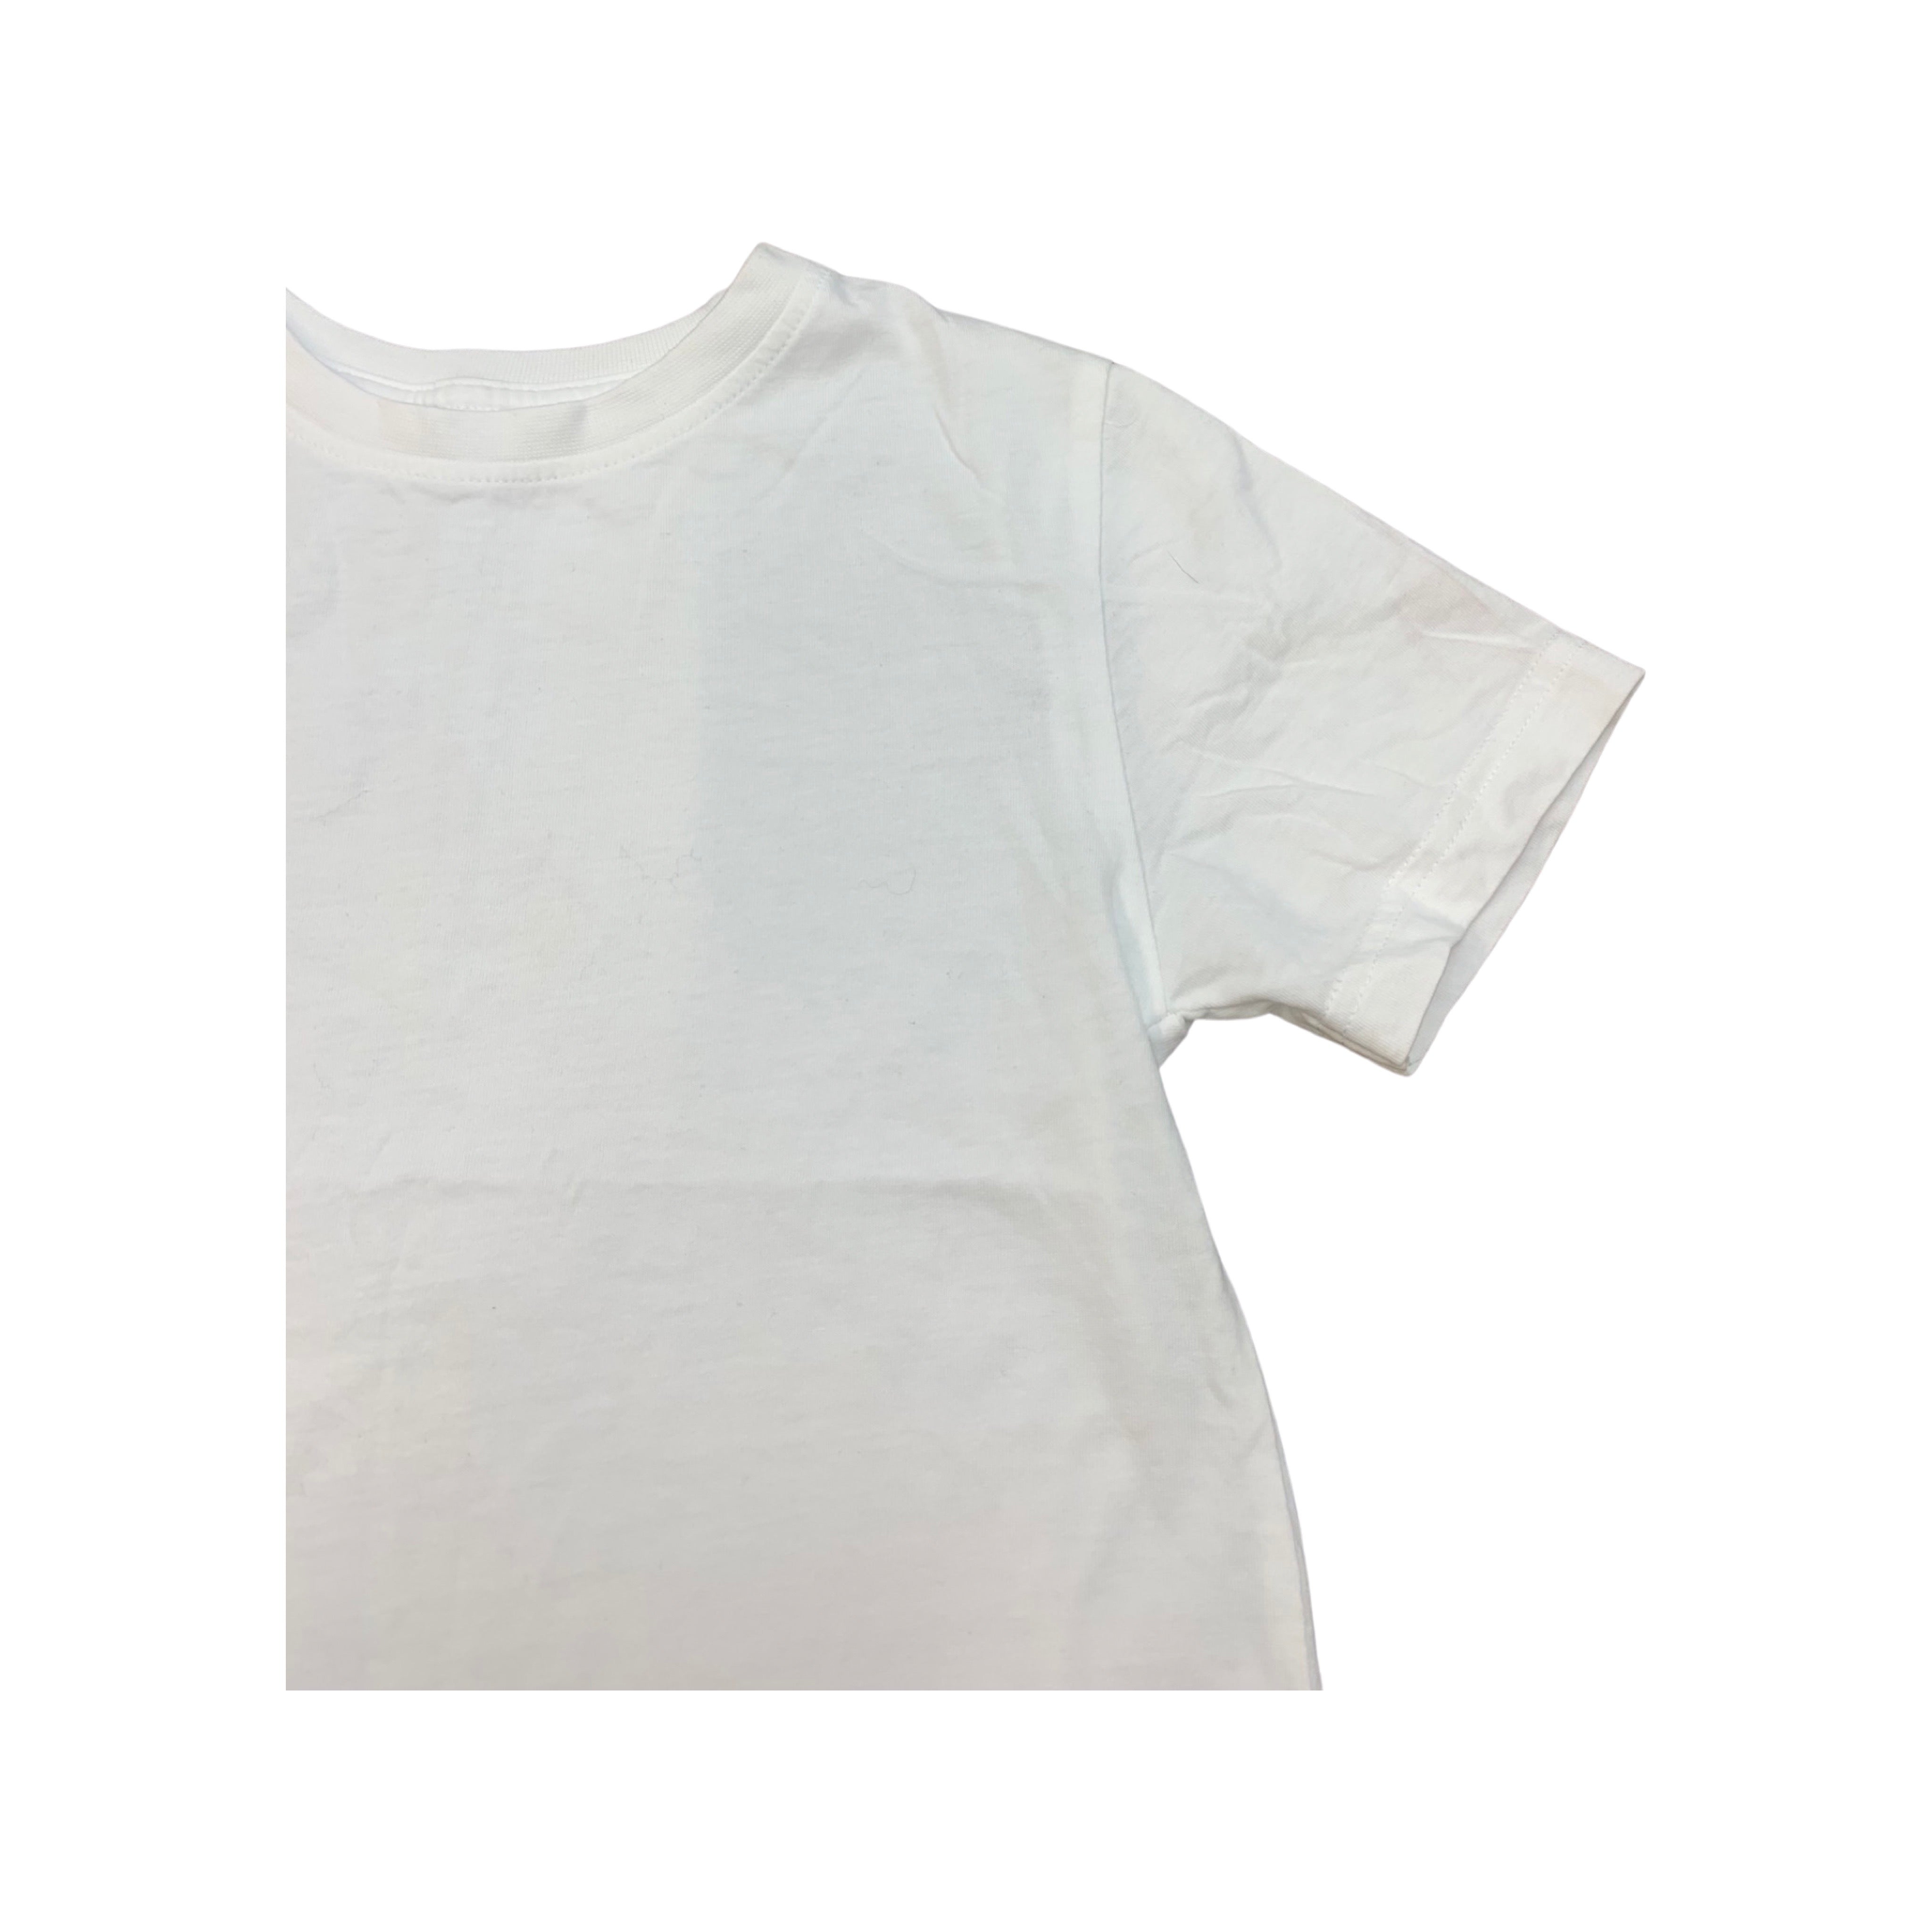 George Cotton T Shirt Boys 7-8 years